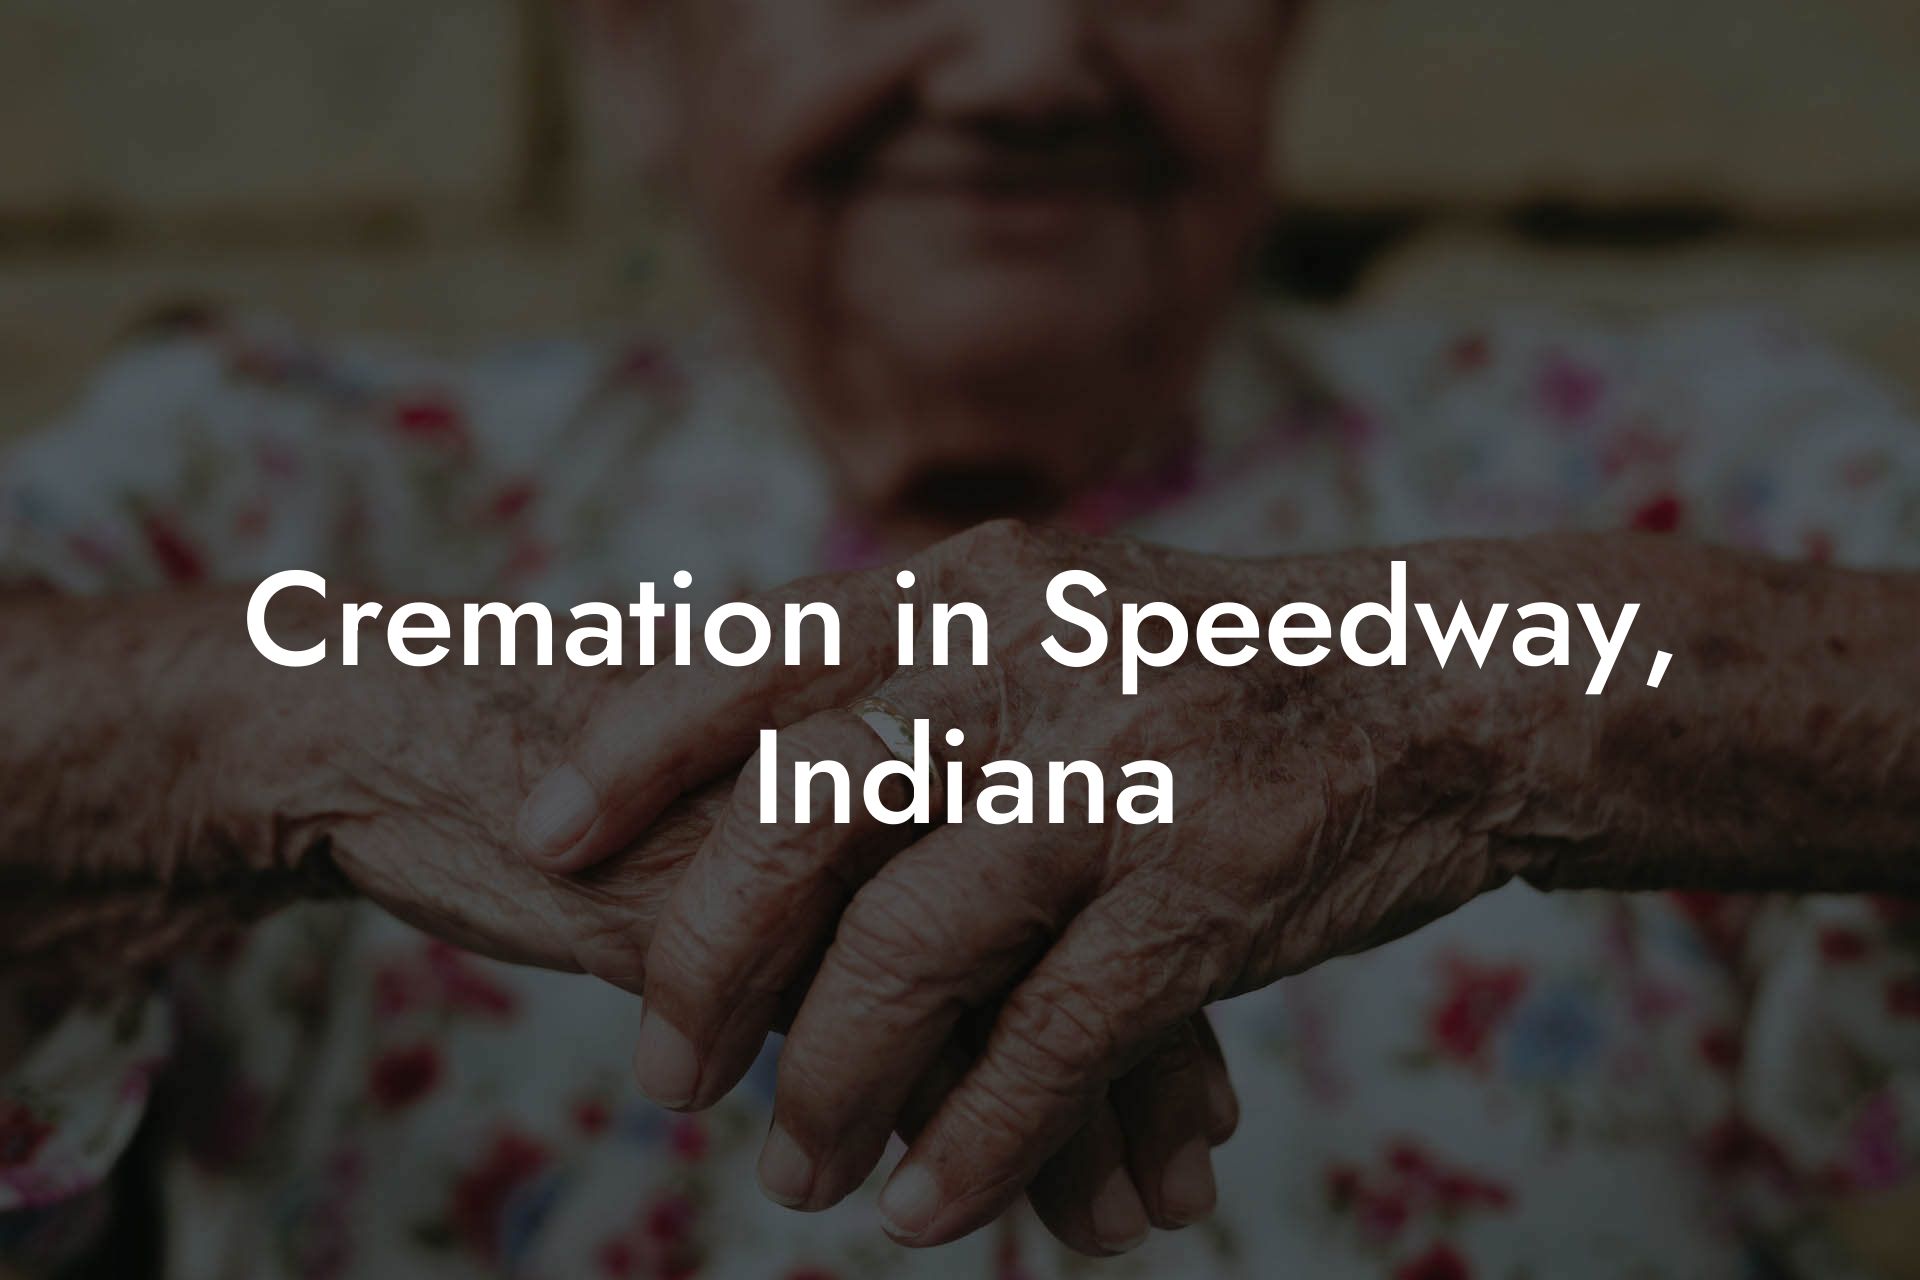 Cremation in Speedway, Indiana